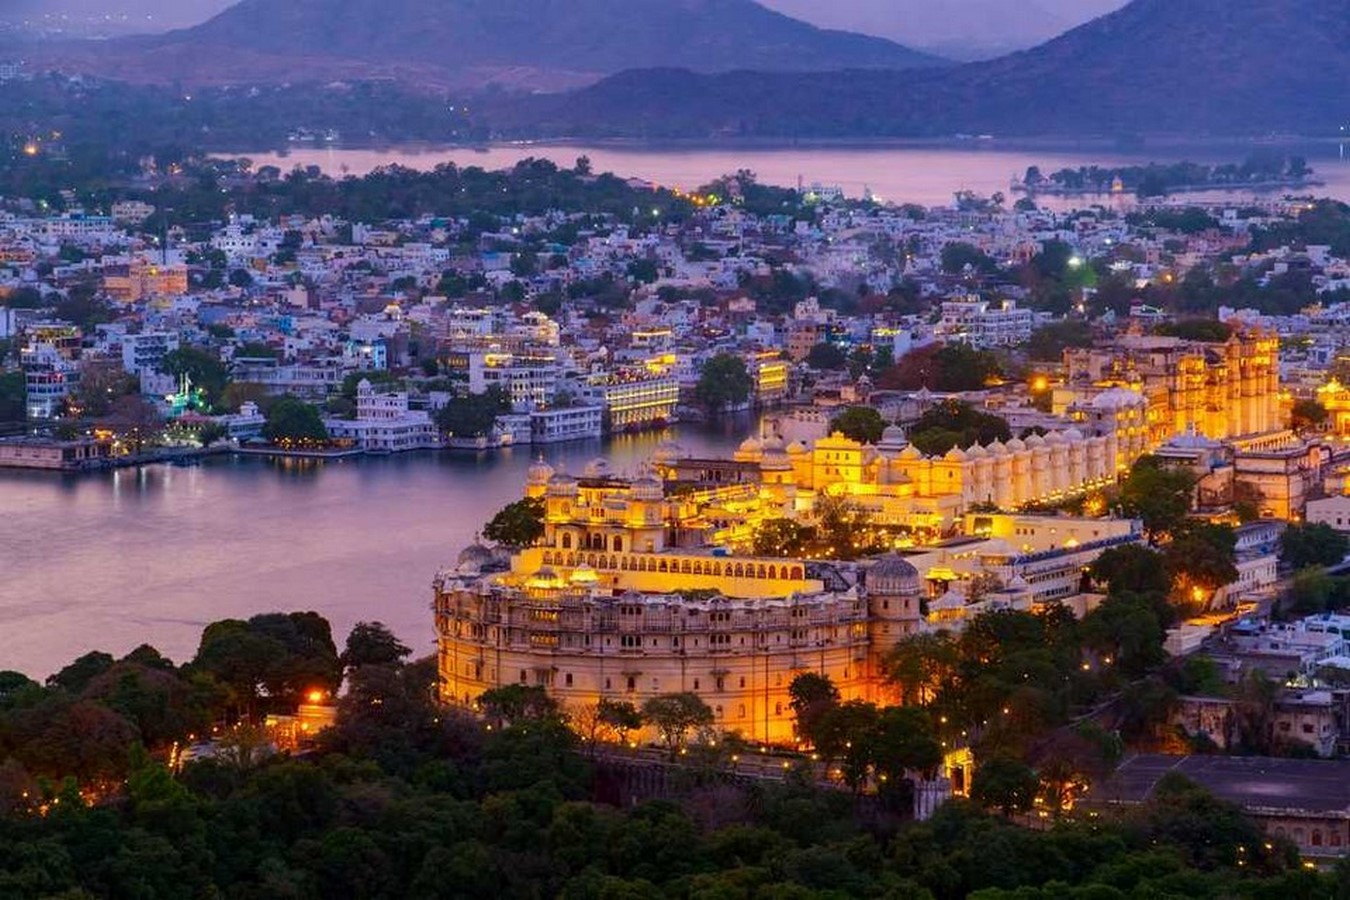 Architecture of Indian Cities Udaipur - City of lakes - Sheet1